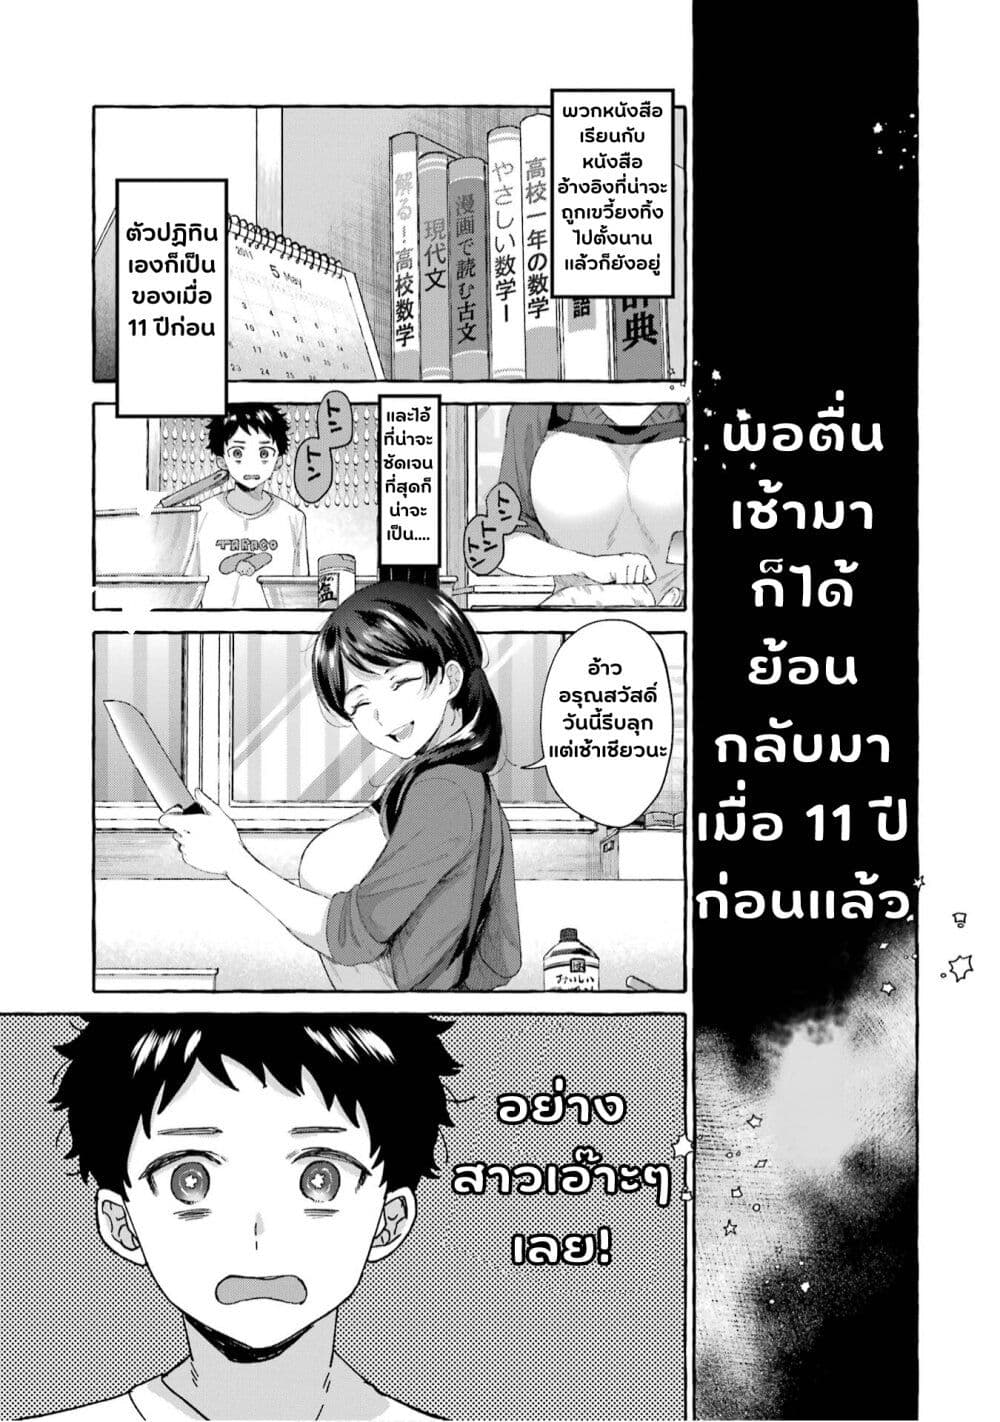 Why Is My Strict Boss Melted by Me ตอนที่ 1.2 (2)